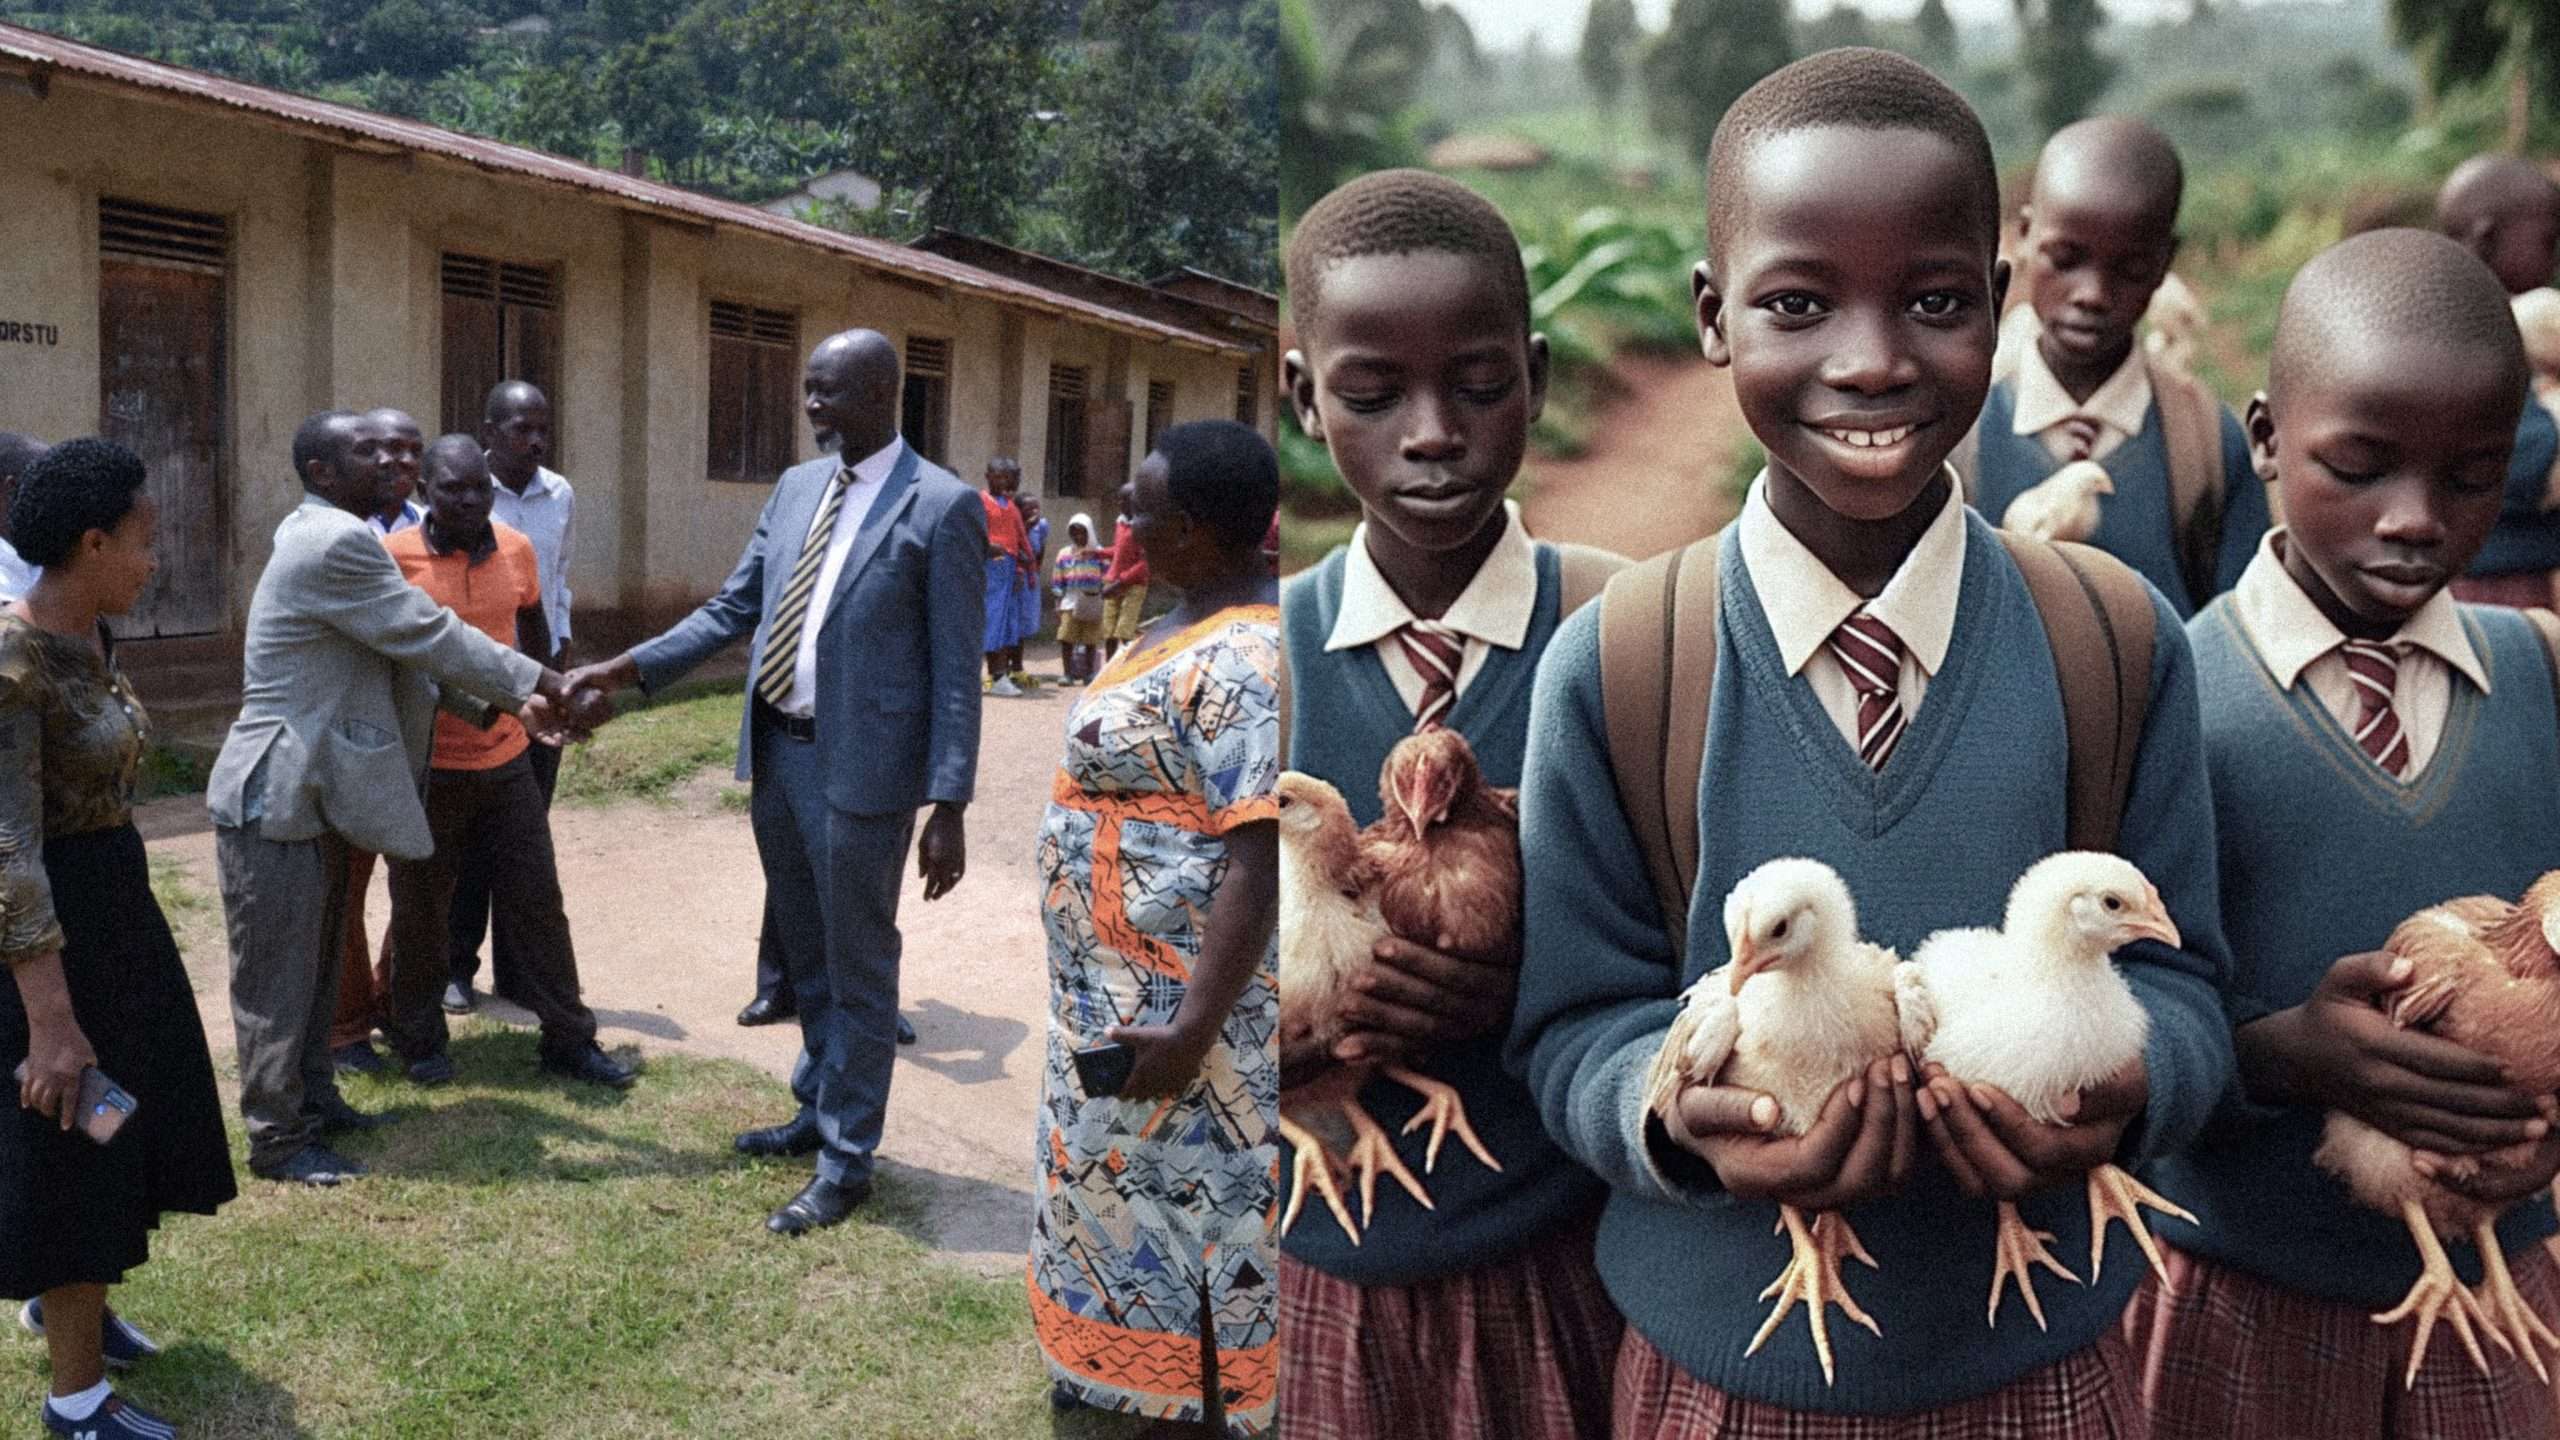 Ugandan Schools Add Chickens to List of Student Requirements